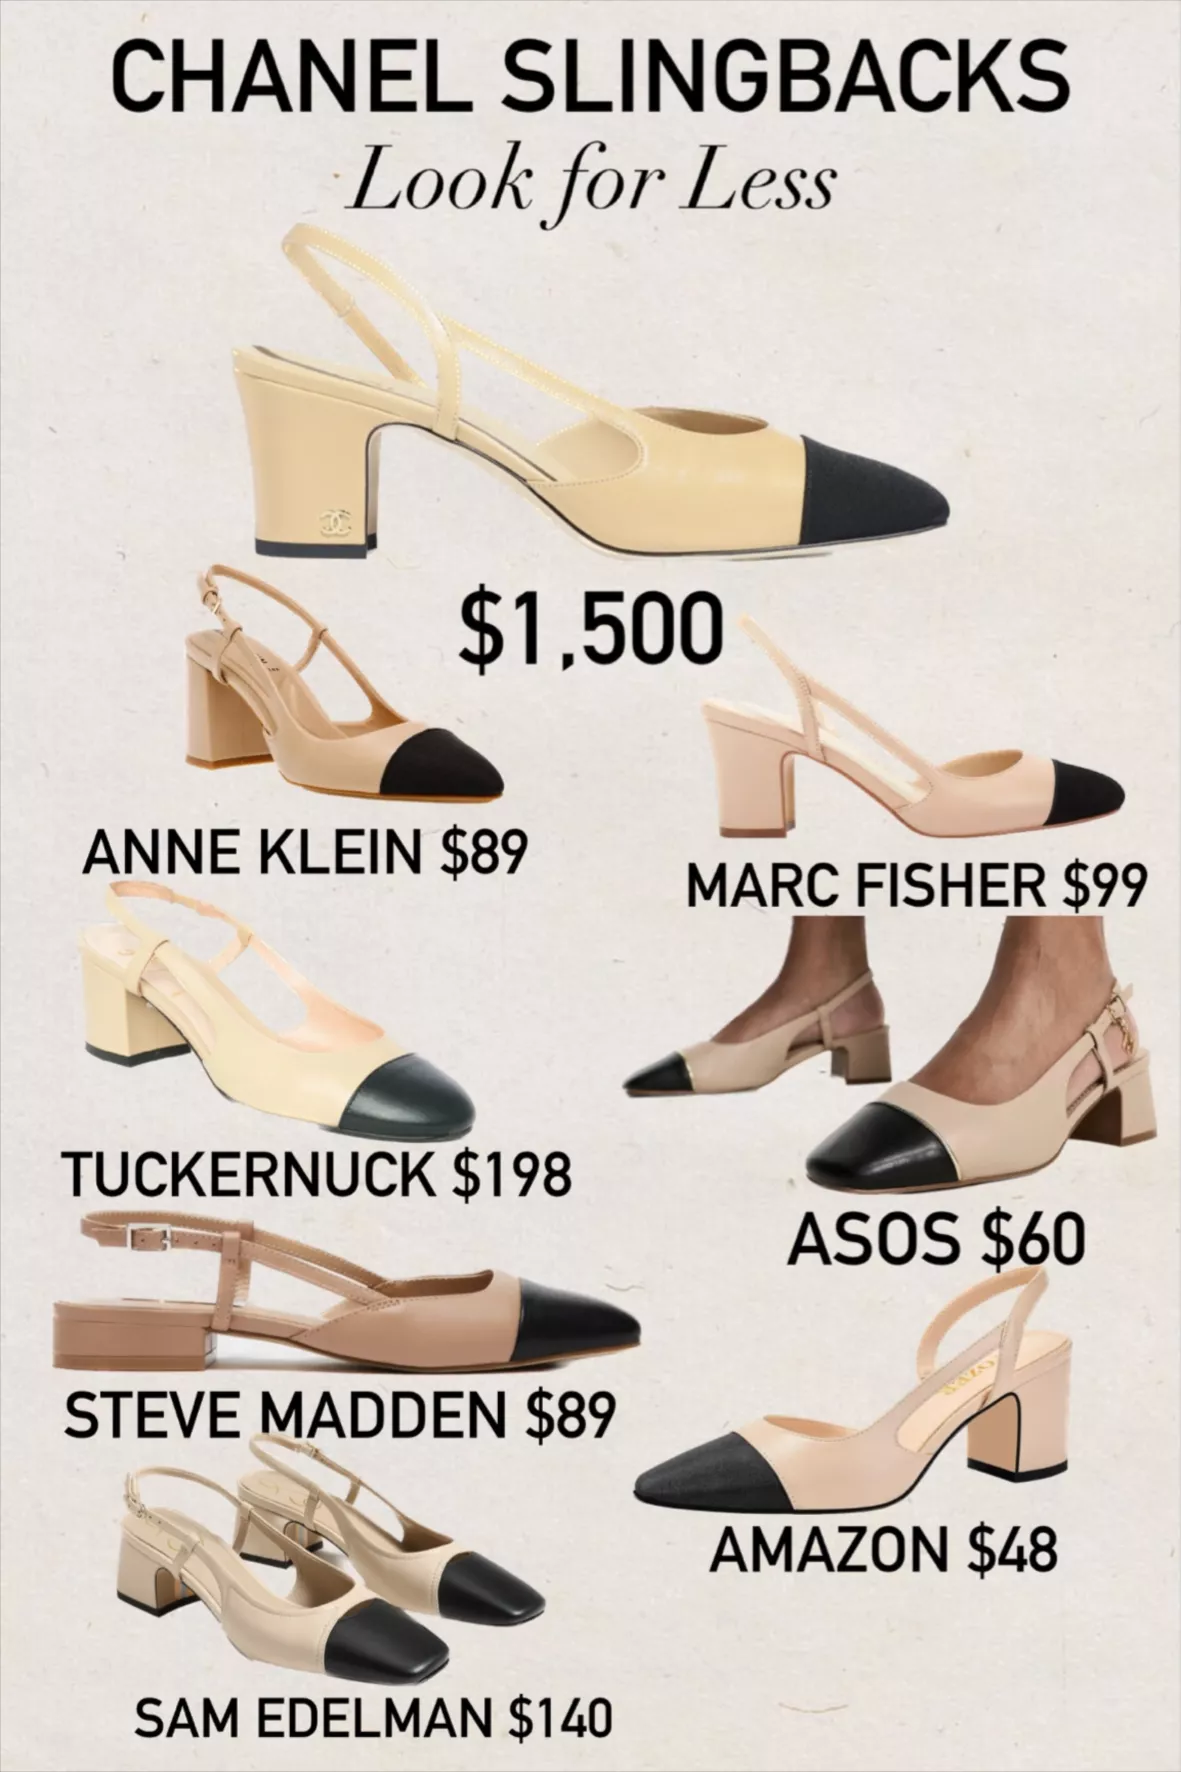 Get The Look for Less: Chanel Slingback Dupes for $53 (vs $875) - Merideth  Morgan